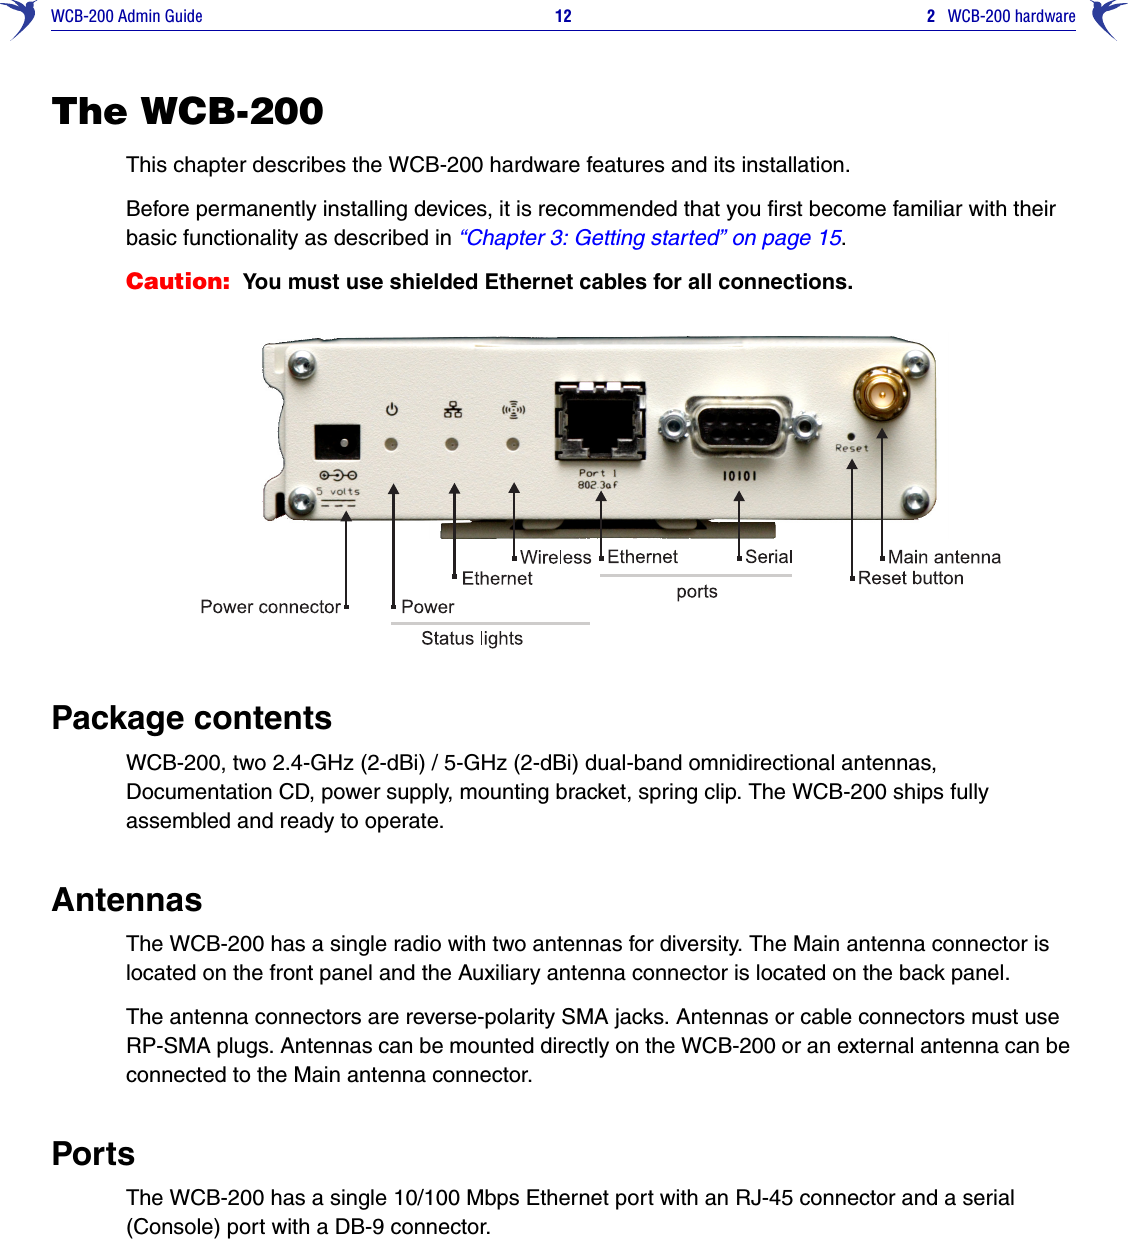 WCB-200 Admin Guide 12 2   WCB-200 hardwareThe WCB-200This chapter describes the WCB-200 hardware features and its installation.Before permanently installing devices, it is recommended that you first become familiar with their basic functionality as described in “Chapter 3: Getting started” on page 15.Caution: You must use shielded Ethernet cables for all connections.Package contentsWCB-200, two 2.4-GHz (2-dBi) / 5-GHz (2-dBi) dual-band omnidirectional antennas, Documentation CD, power supply, mounting bracket, spring clip. The WCB-200 ships fully assembled and ready to operate.AntennasThe WCB-200 has a single radio with two antennas for diversity. The Main antenna connector is located on the front panel and the Auxiliary antenna connector is located on the back panel.The antenna connectors are reverse-polarity SMA jacks. Antennas or cable connectors must use RP-SMA plugs. Antennas can be mounted directly on the WCB-200 or an external antenna can be connected to the Main antenna connector.PortsThe WCB-200 has a single 10/100 Mbps Ethernet port with an RJ-45 connector and a serial (Console) port with a DB-9 connector. 